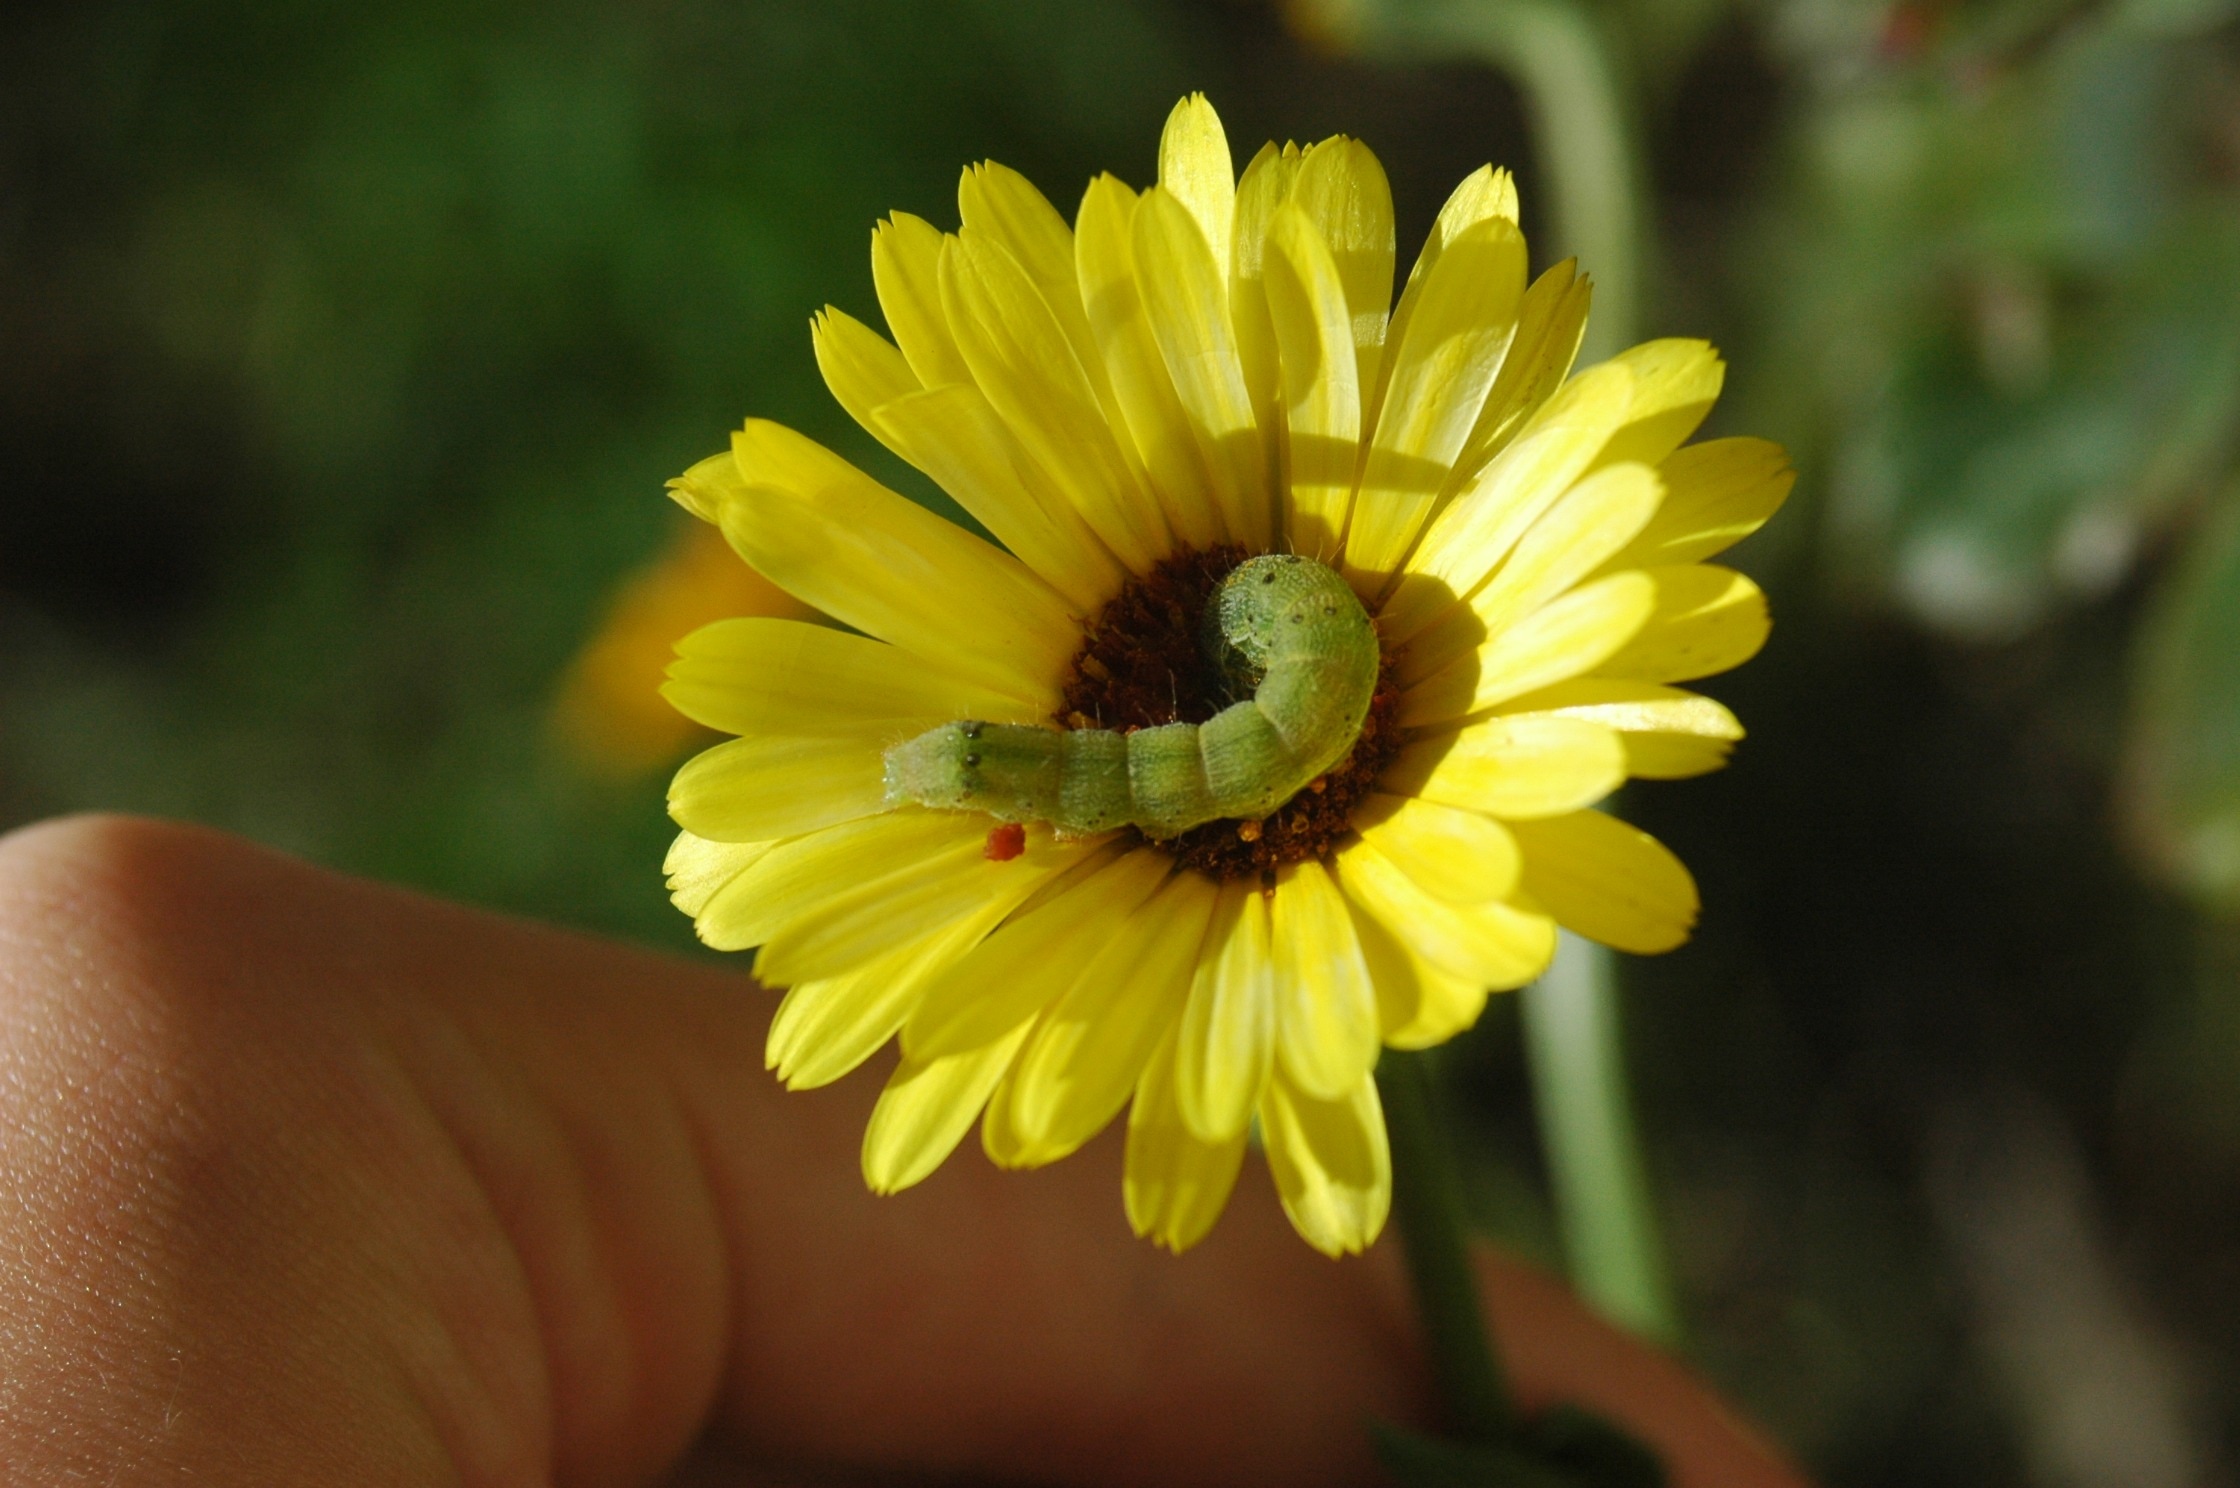 green caterpillar and yellow flower plant